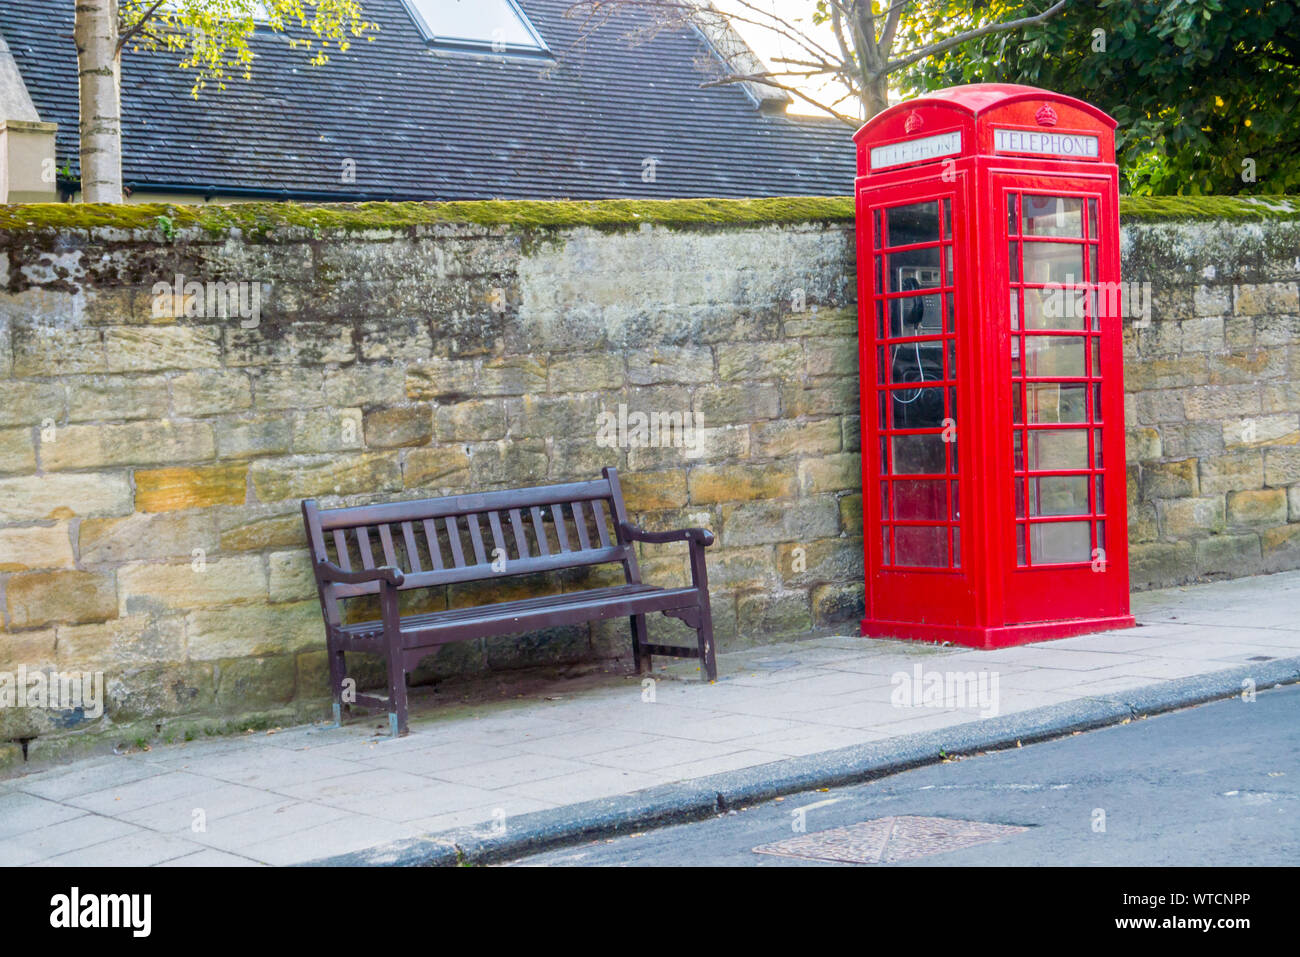 A Red Telephone Box and Public Bench in a UK Street Stock Photo